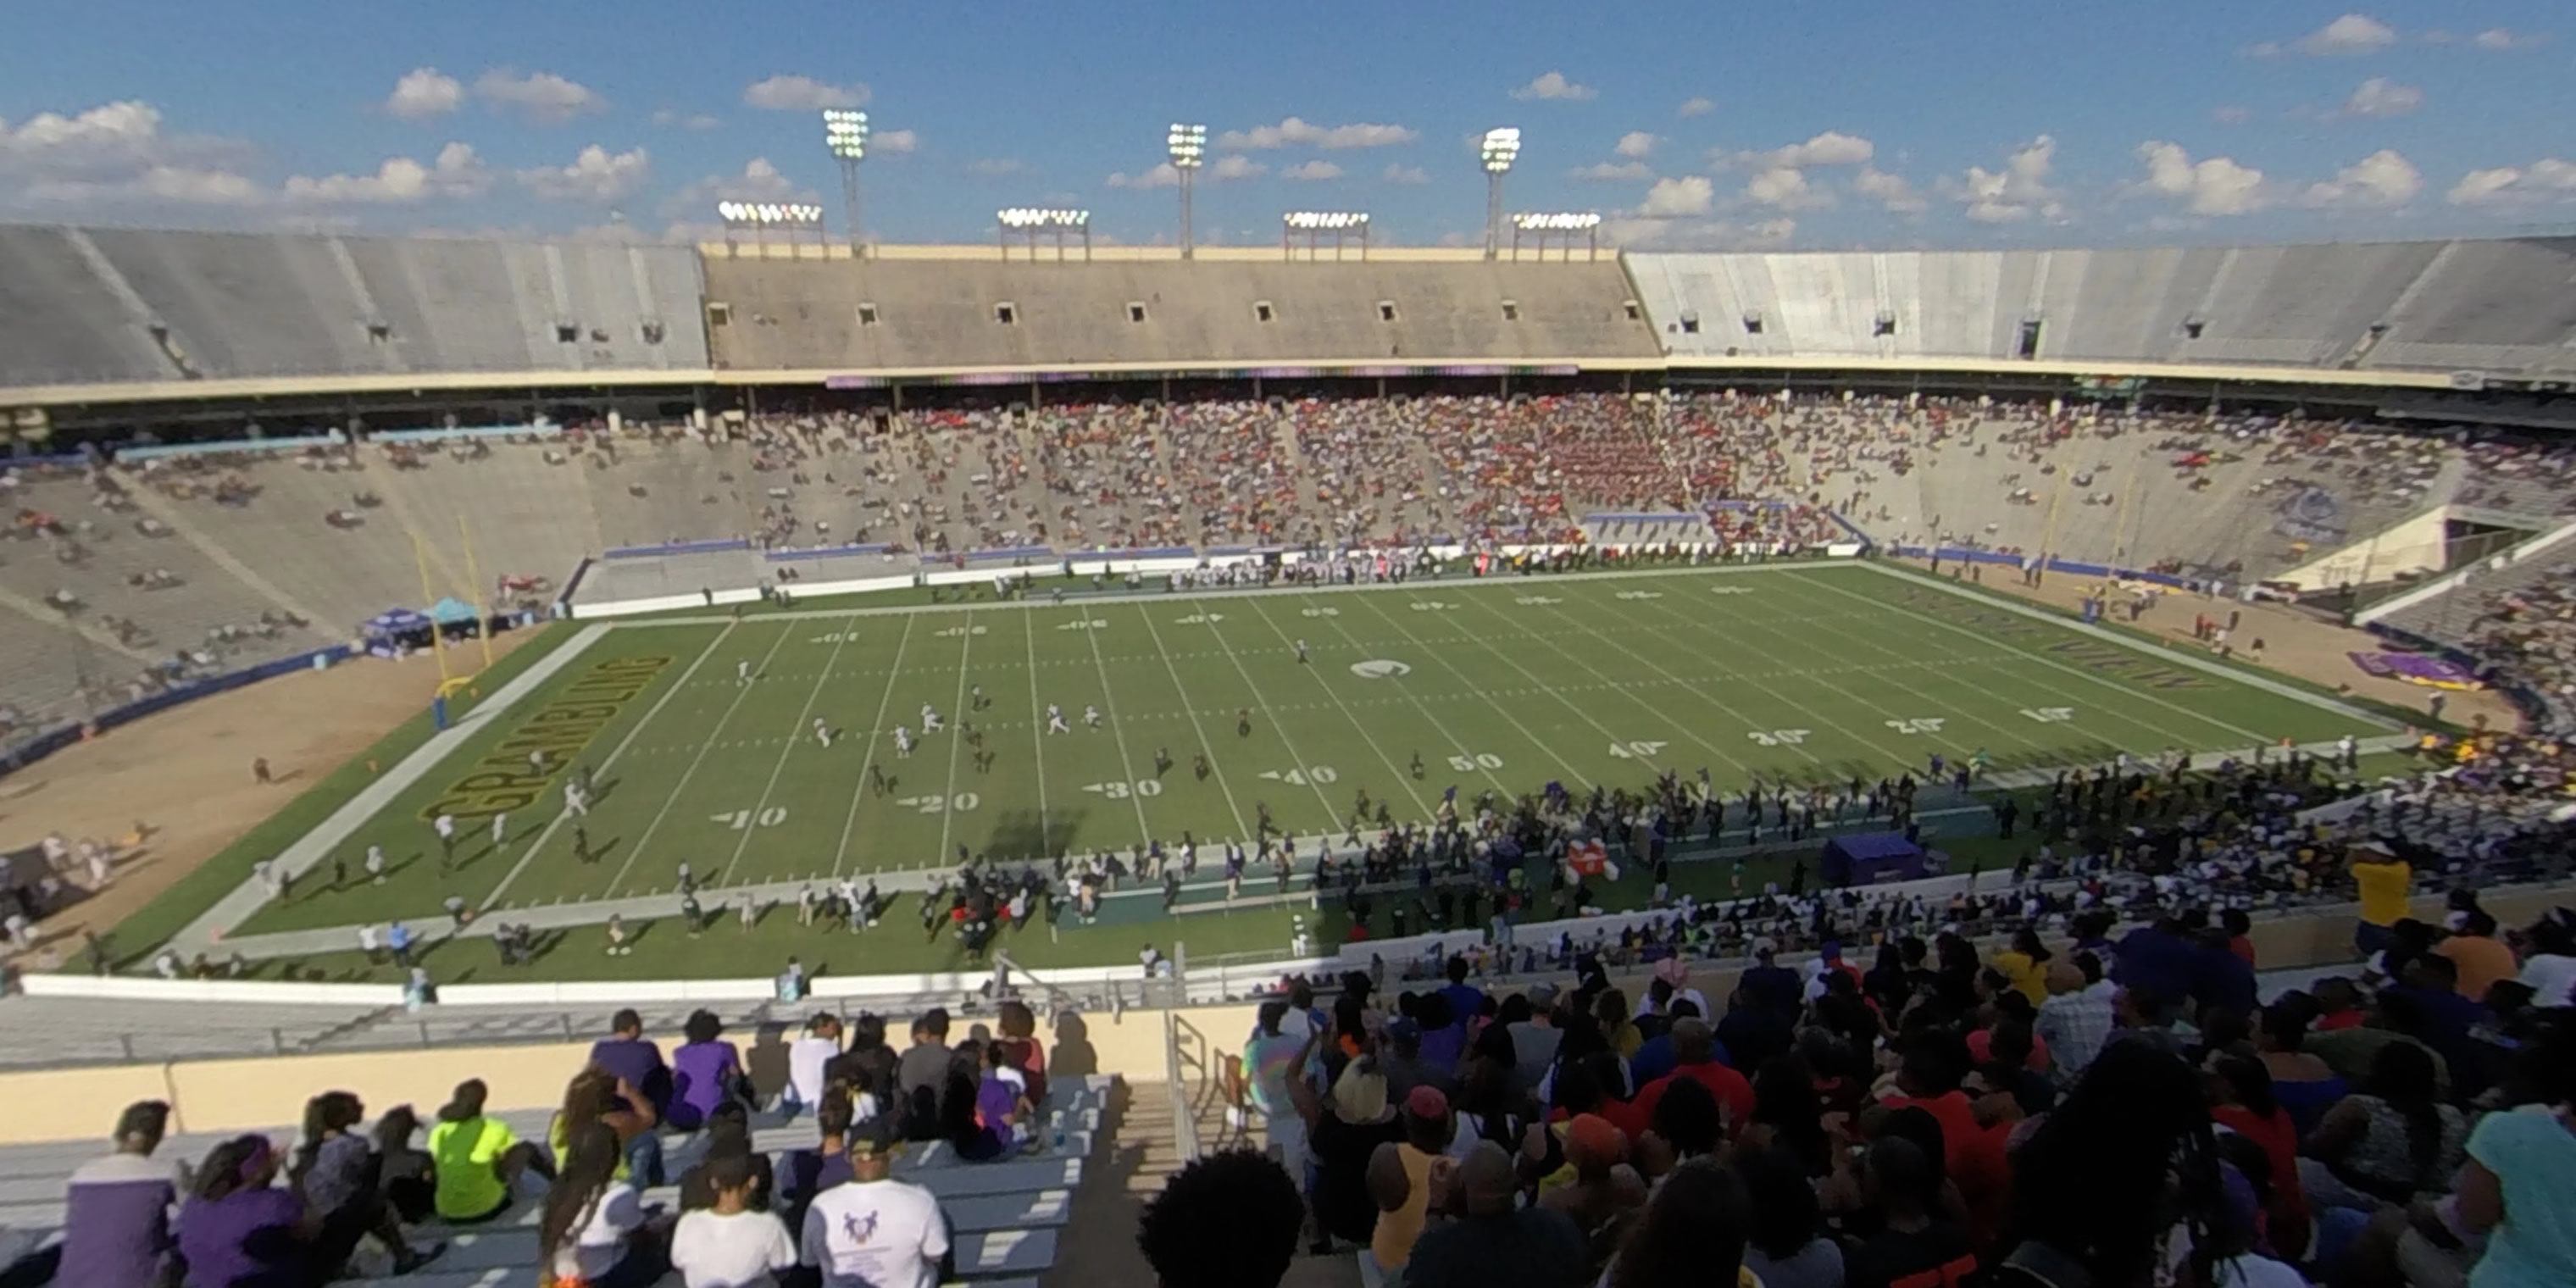 section 107 panoramic seat view  - cotton bowl